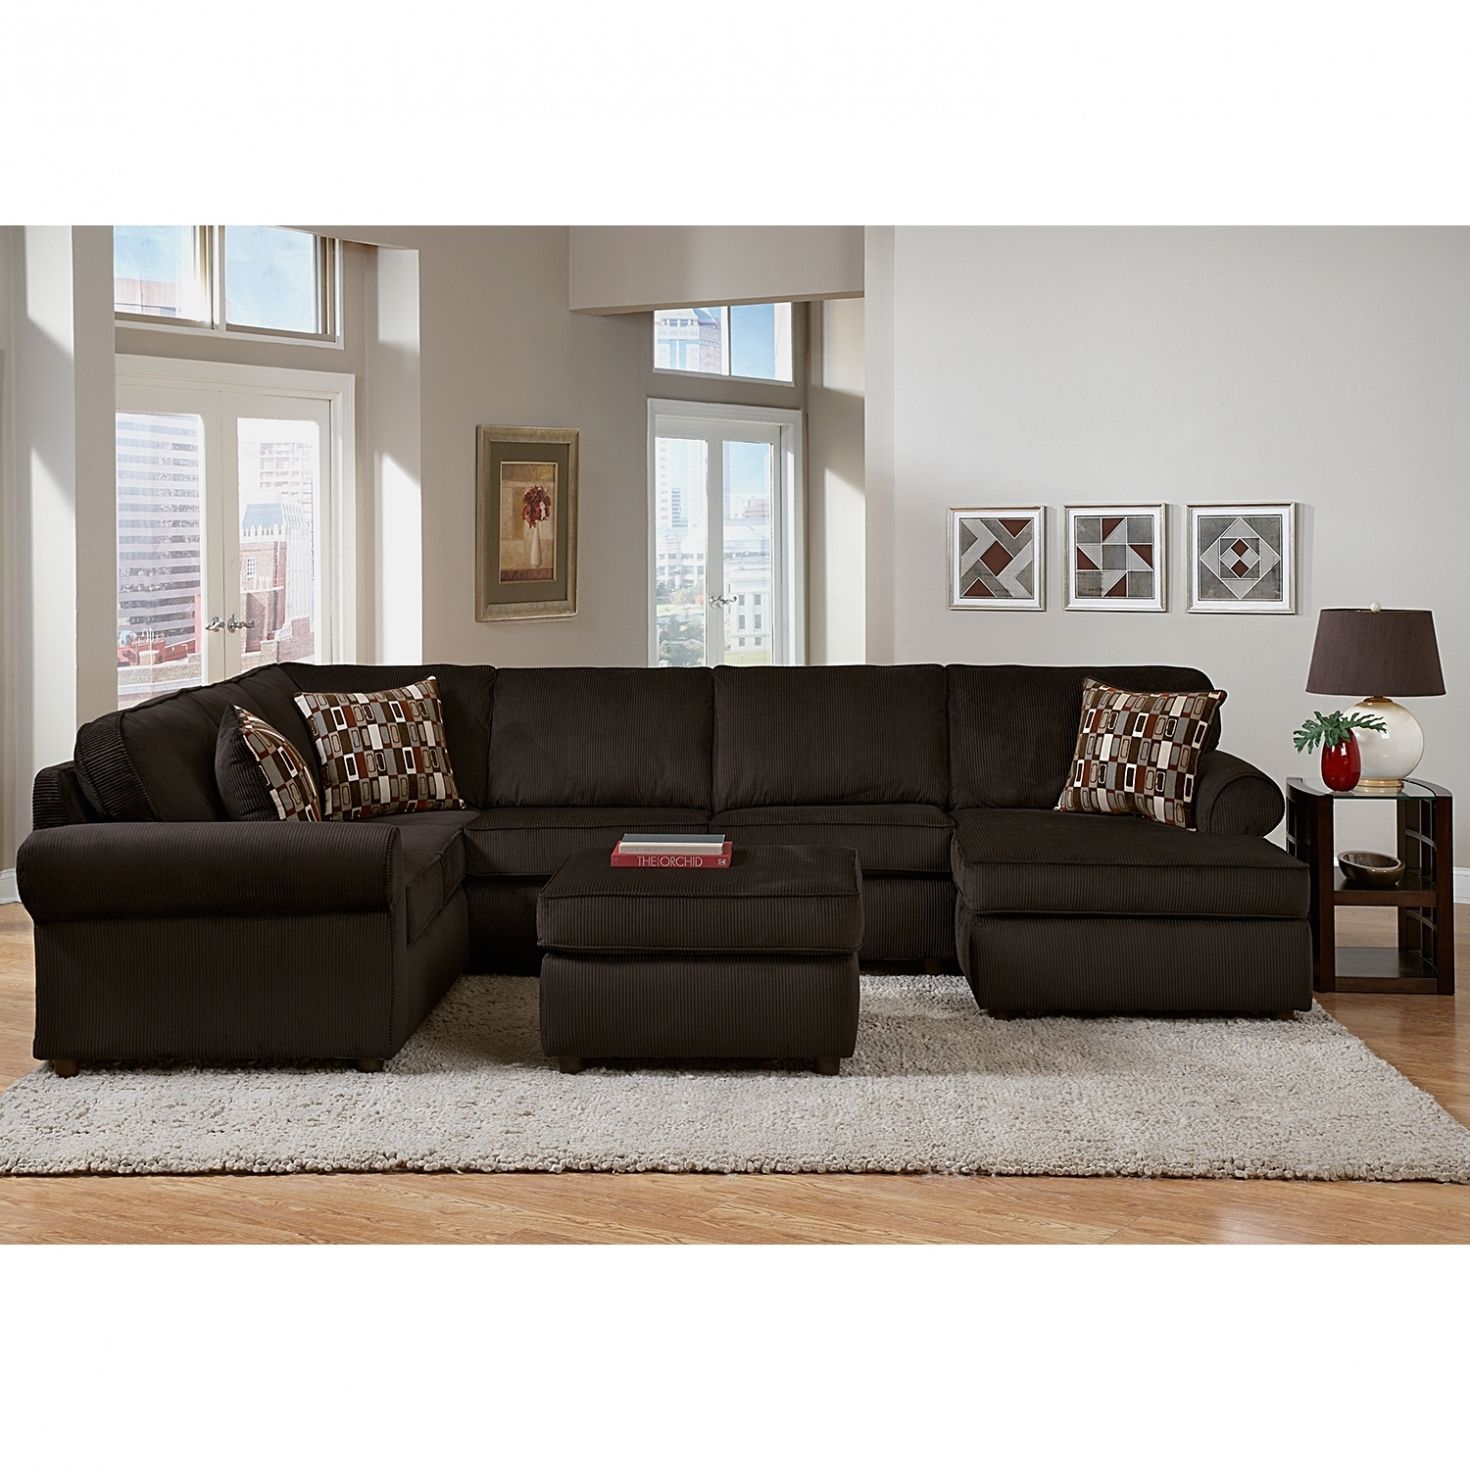 Furniture: New Value City Sectional Sofa 32 For Living Room Sofa Pertaining To Value City Sectional Sofas (Photo 1 of 10)